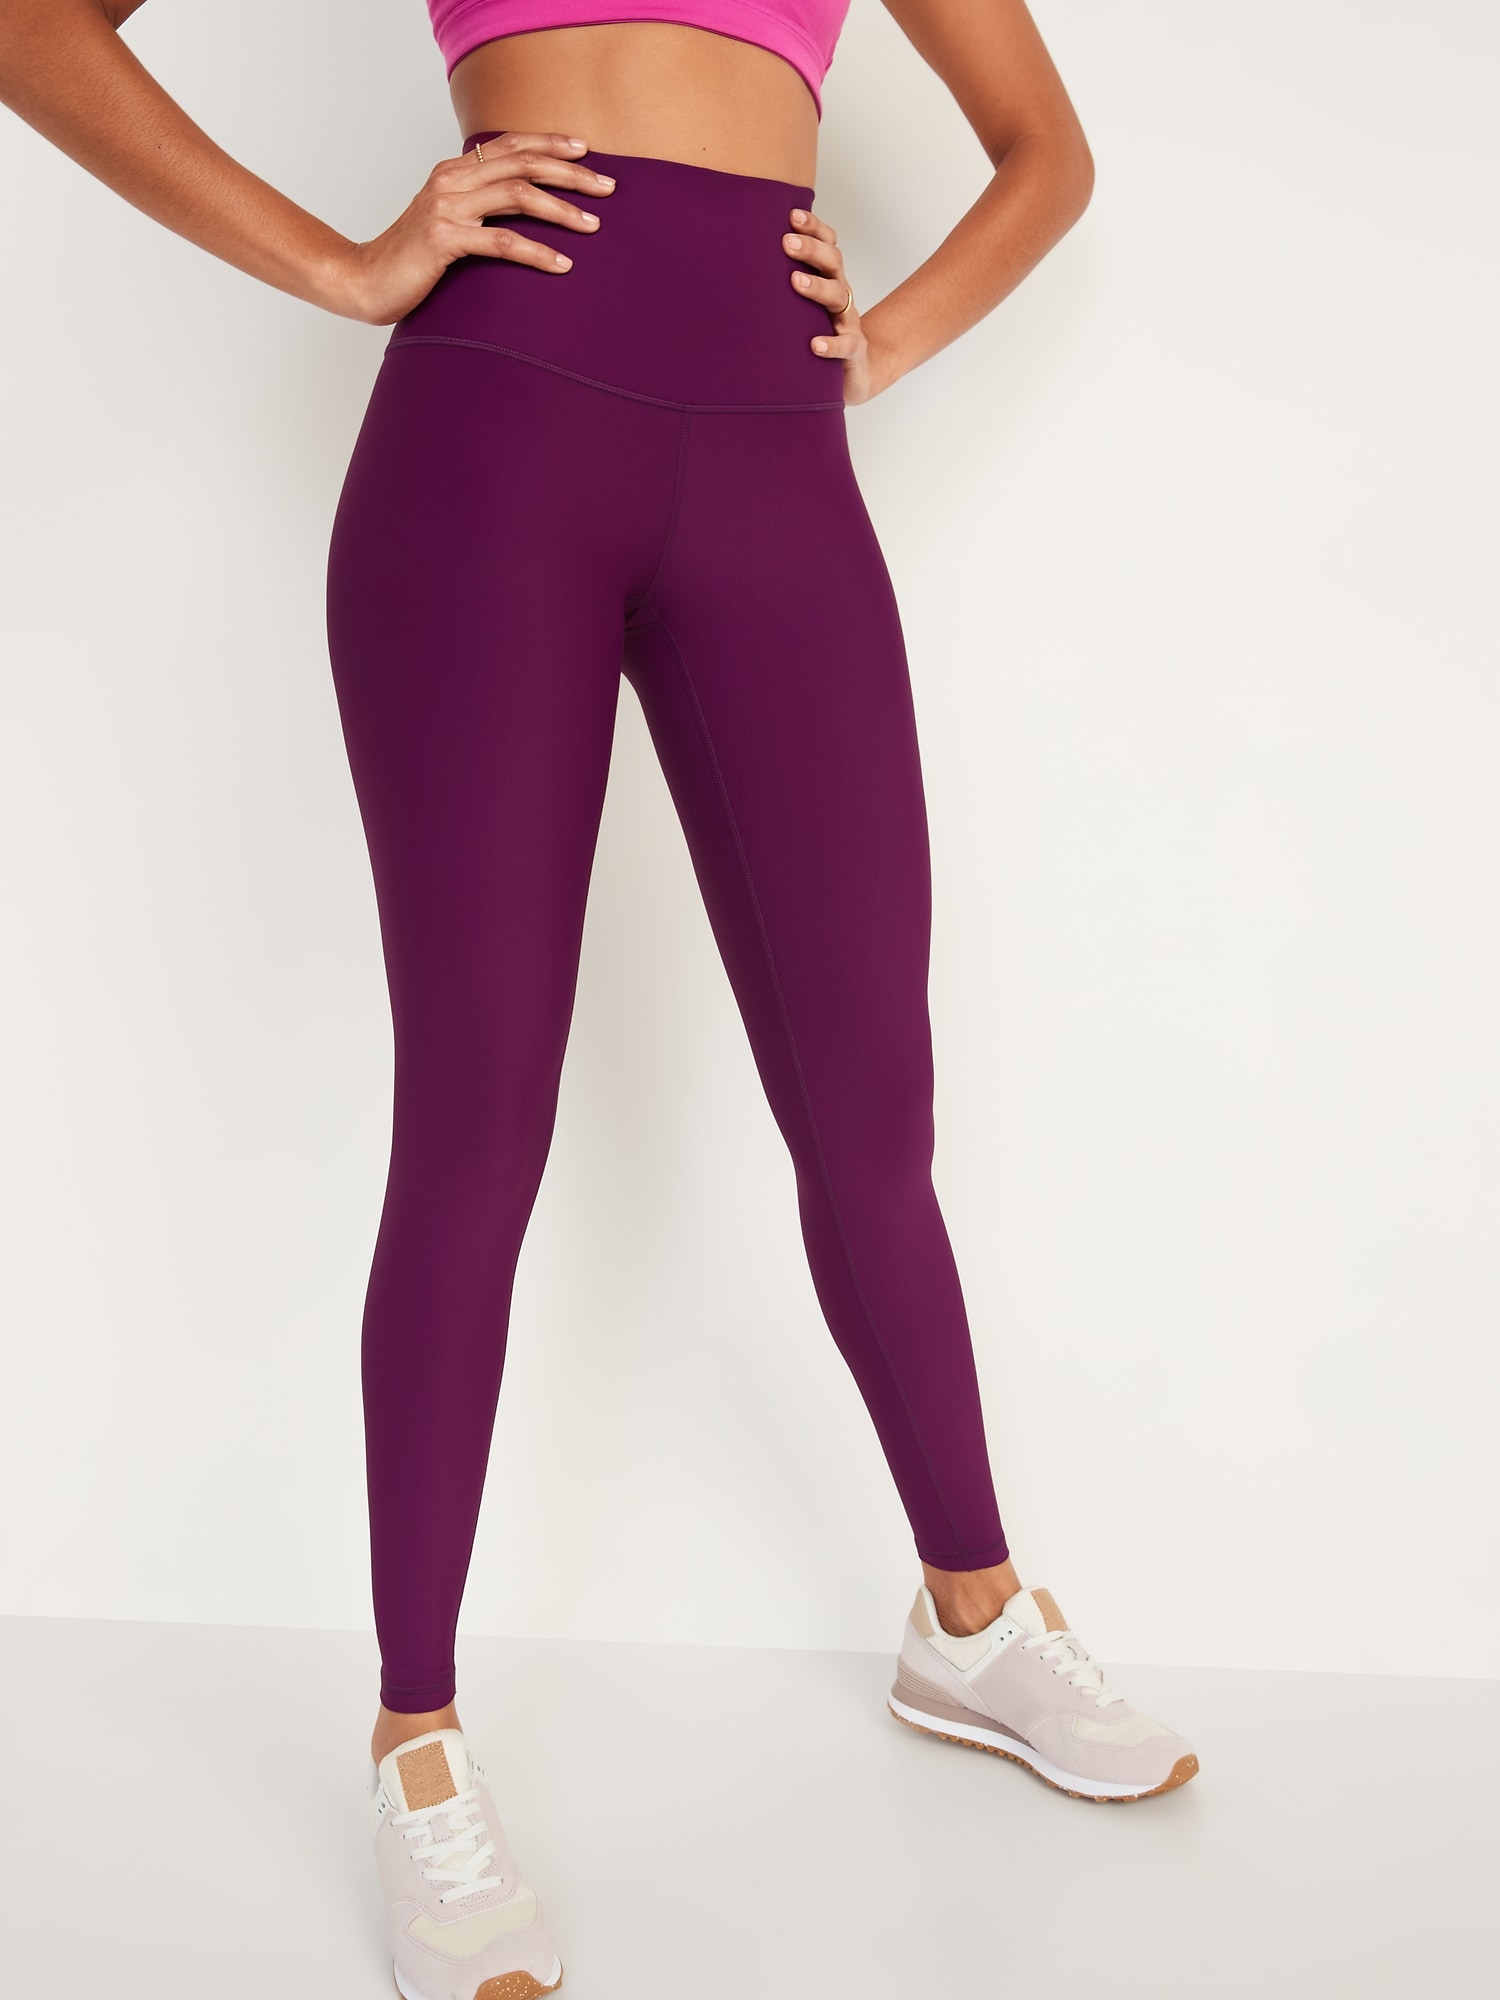 Workout Leggings For Women: Trendy Athletic Wear | Calzedonia-megaelearning.vn